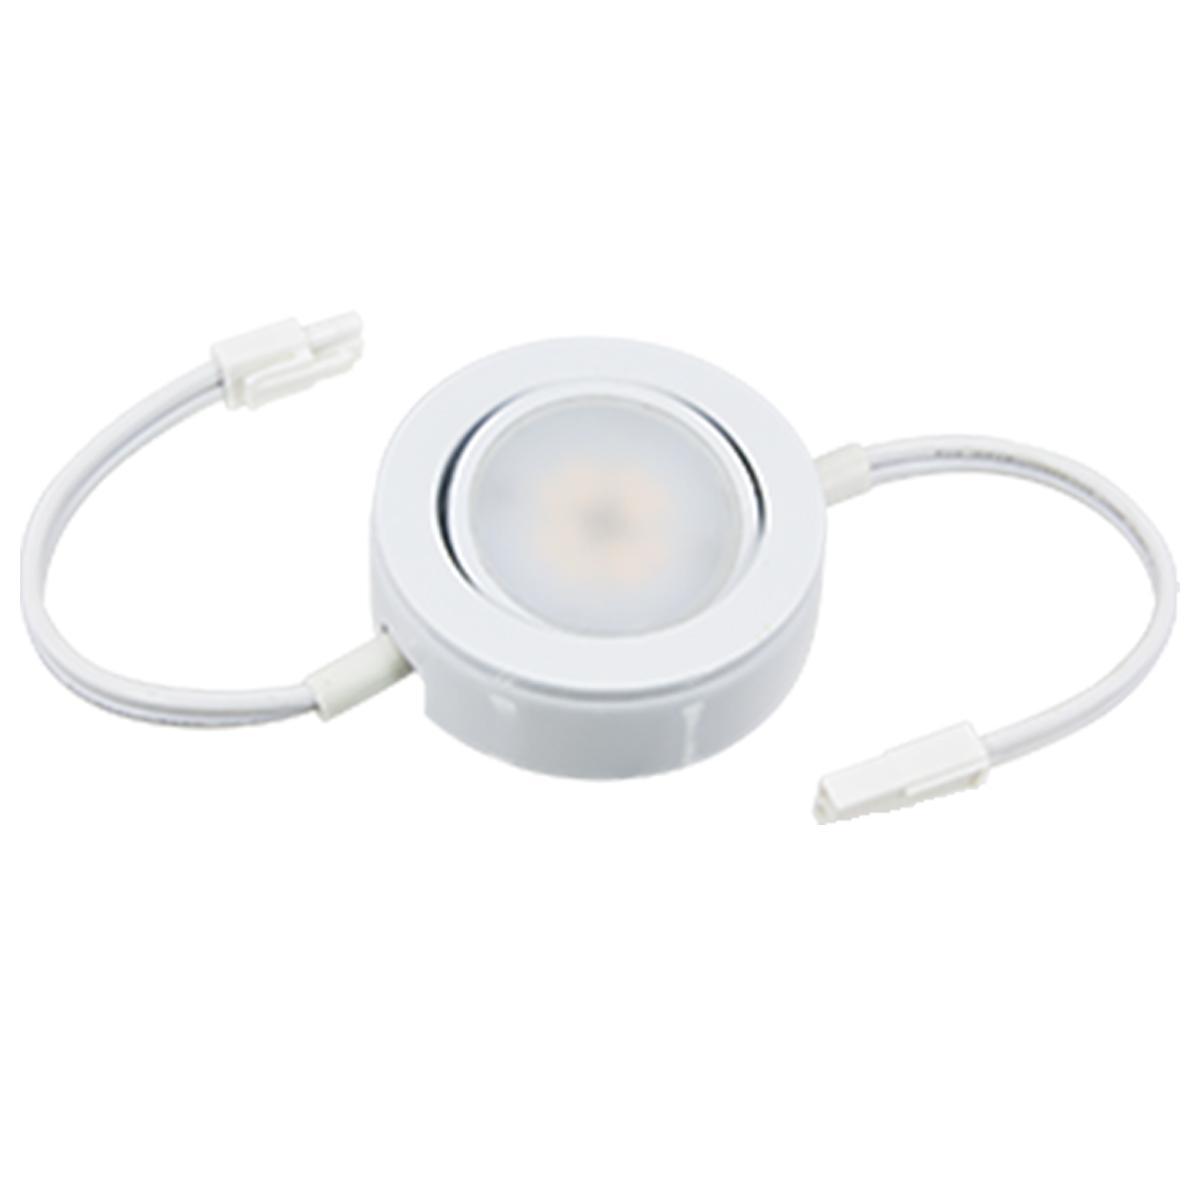 MVP LED Puck Light with Lead and Tail wires, 4.3 Watts, 2700K, 120V, White - Bees Lighting